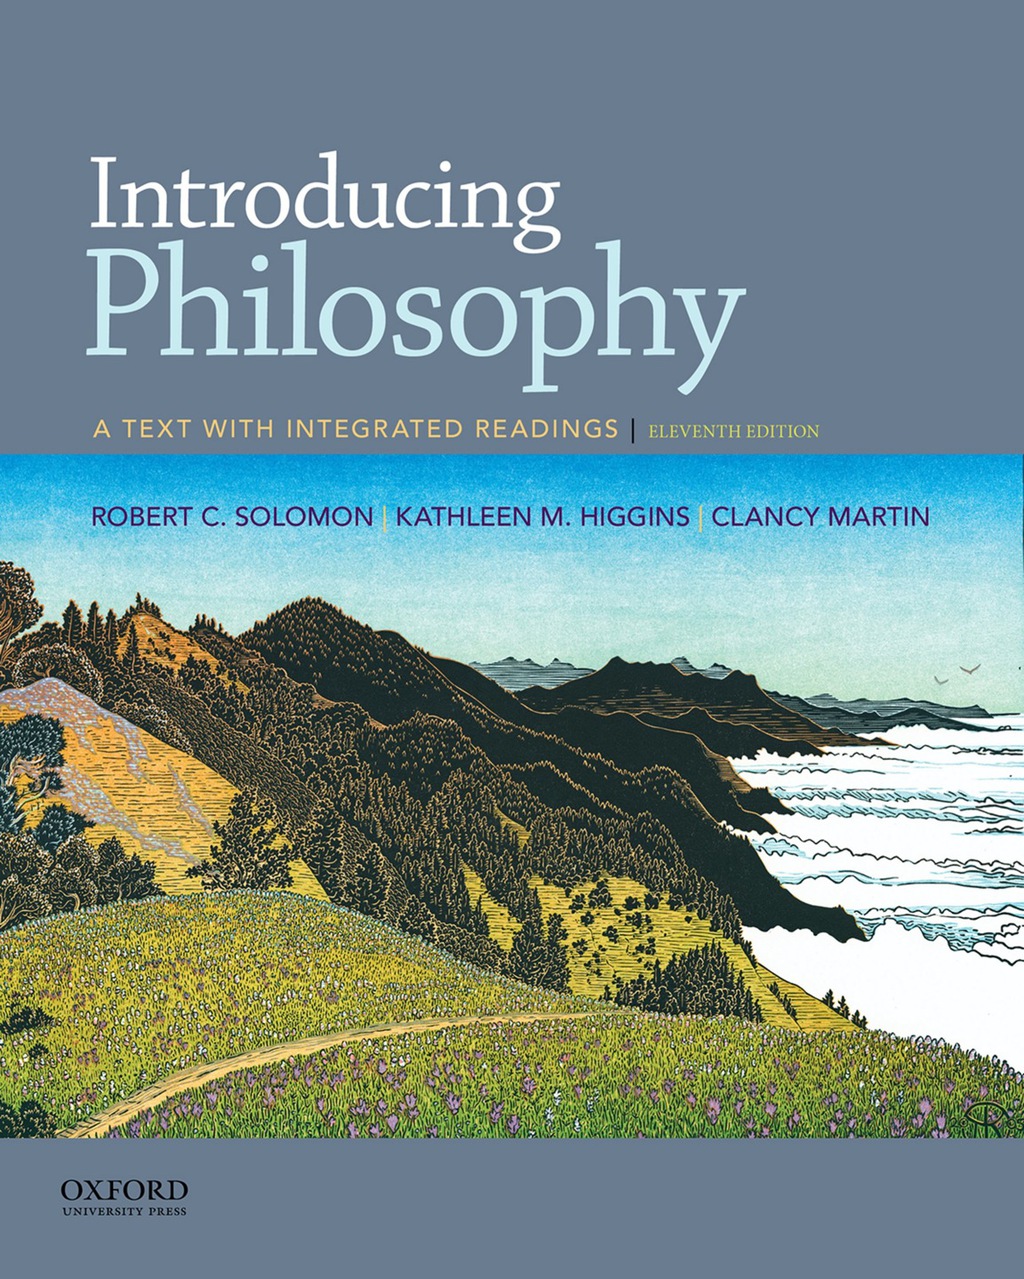 ISBN 9780190209490 product image for Introducing Philosophy - 11th Edition (eBook Rental) | upcitemdb.com